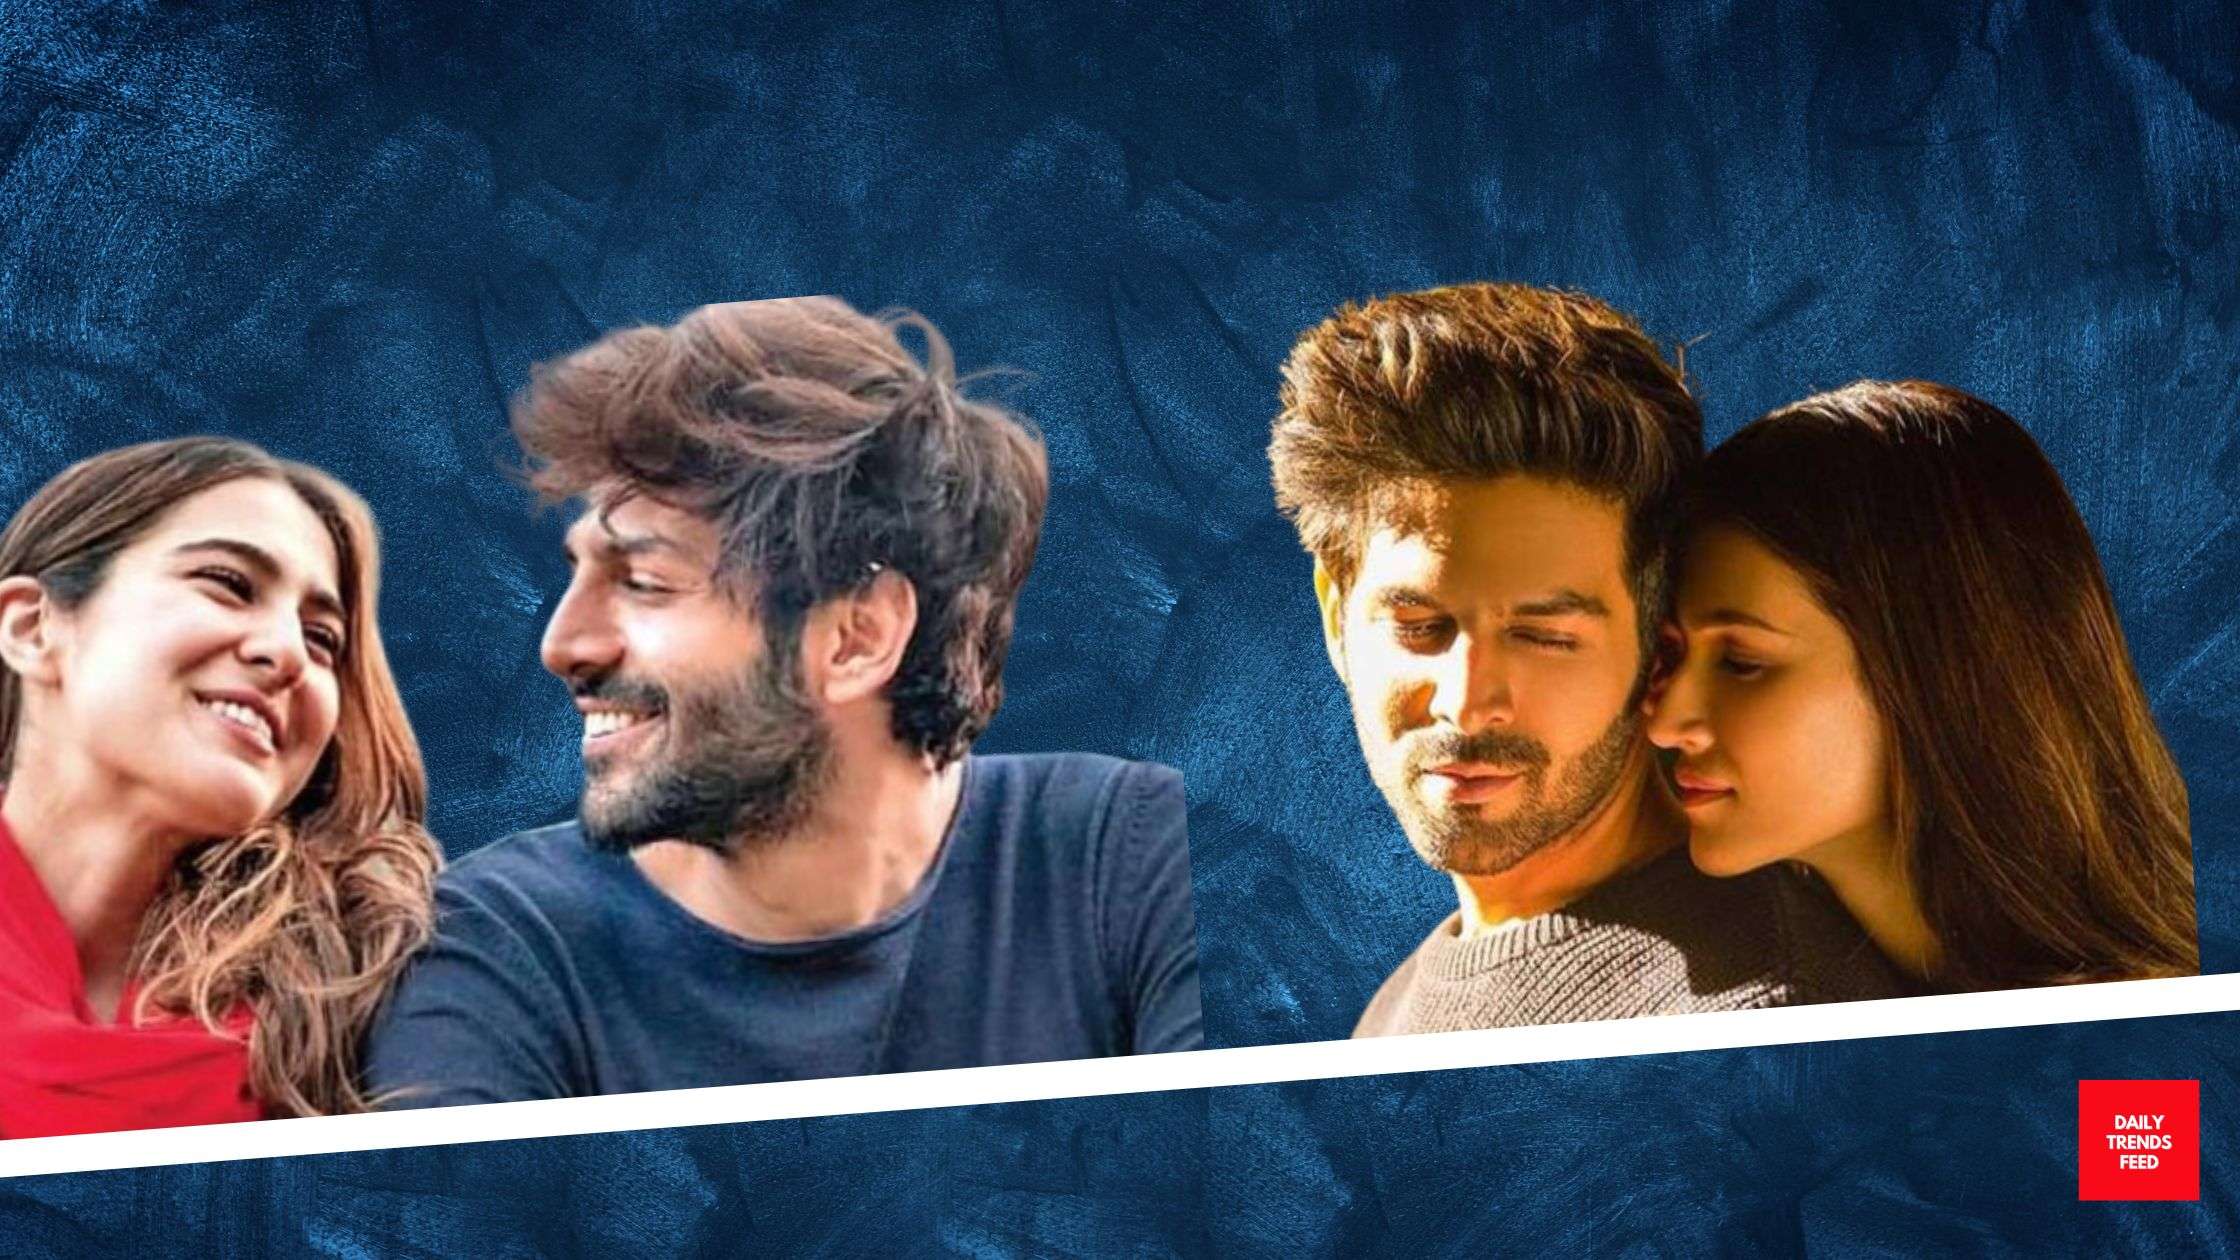 Can You Guess The On-Screen Name Of Kartik Aaryan In These Films?